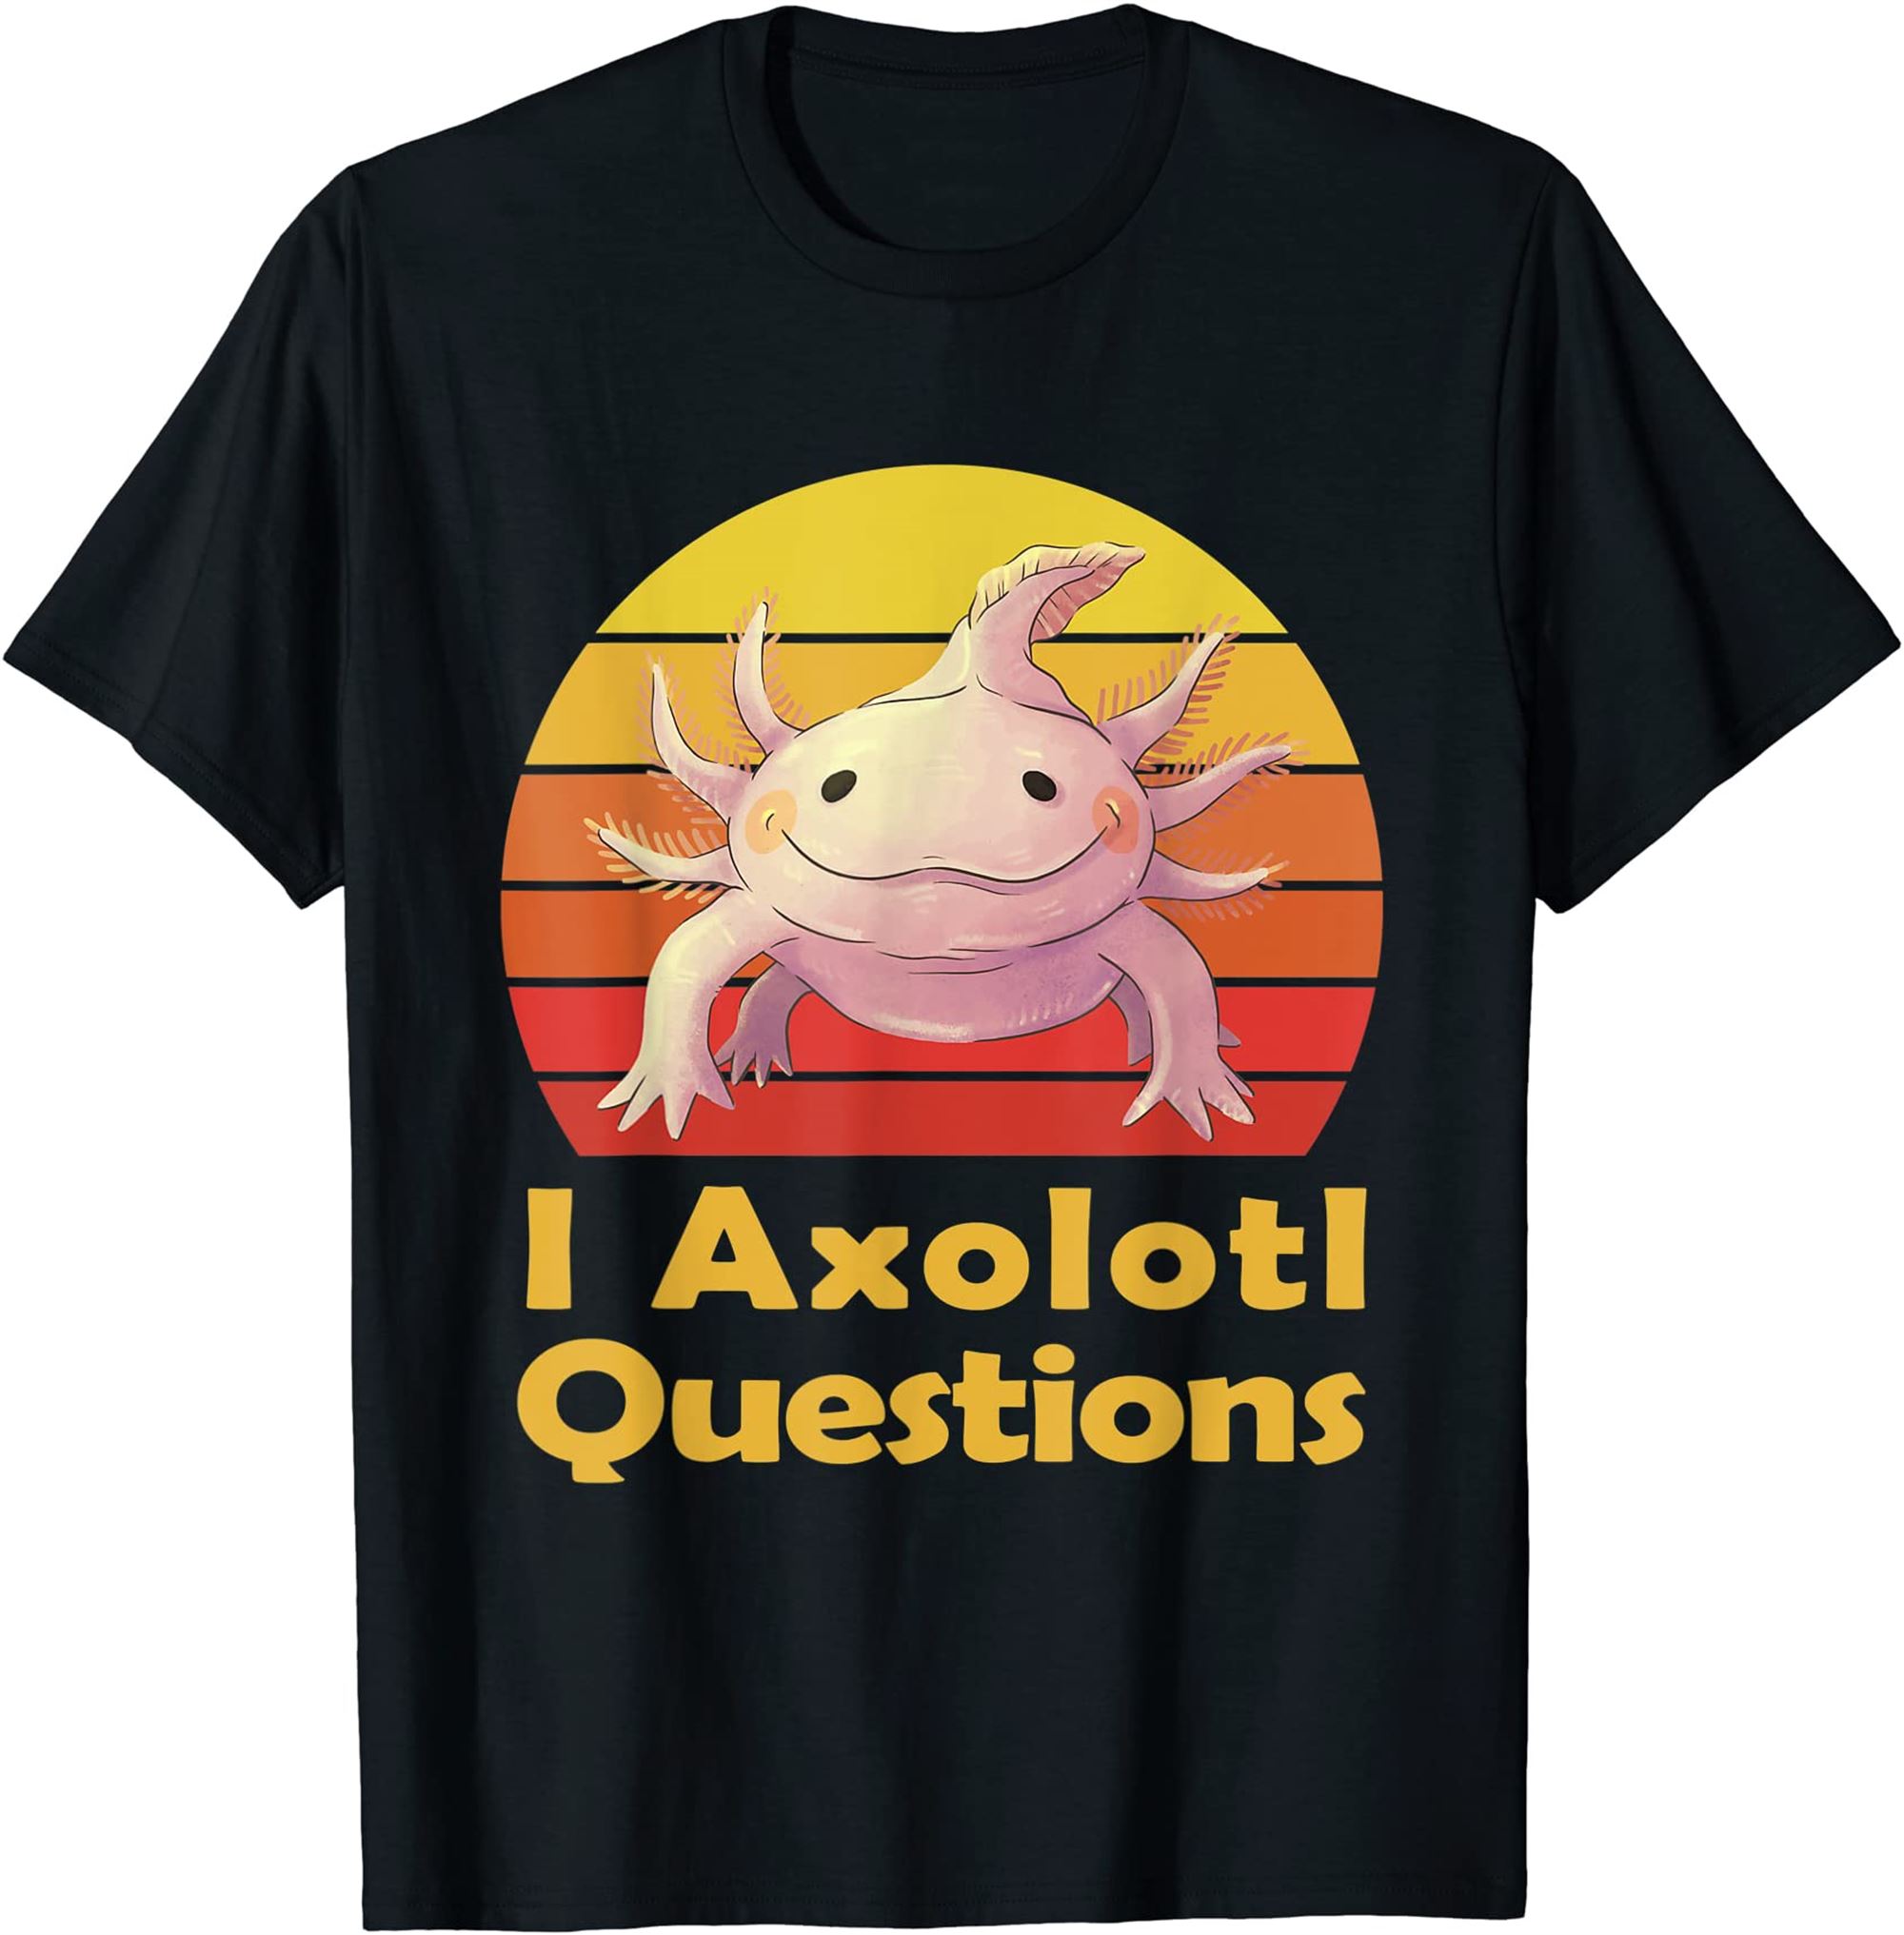 I Axolotl Questions T-shirt Plus Size Up To 5xl